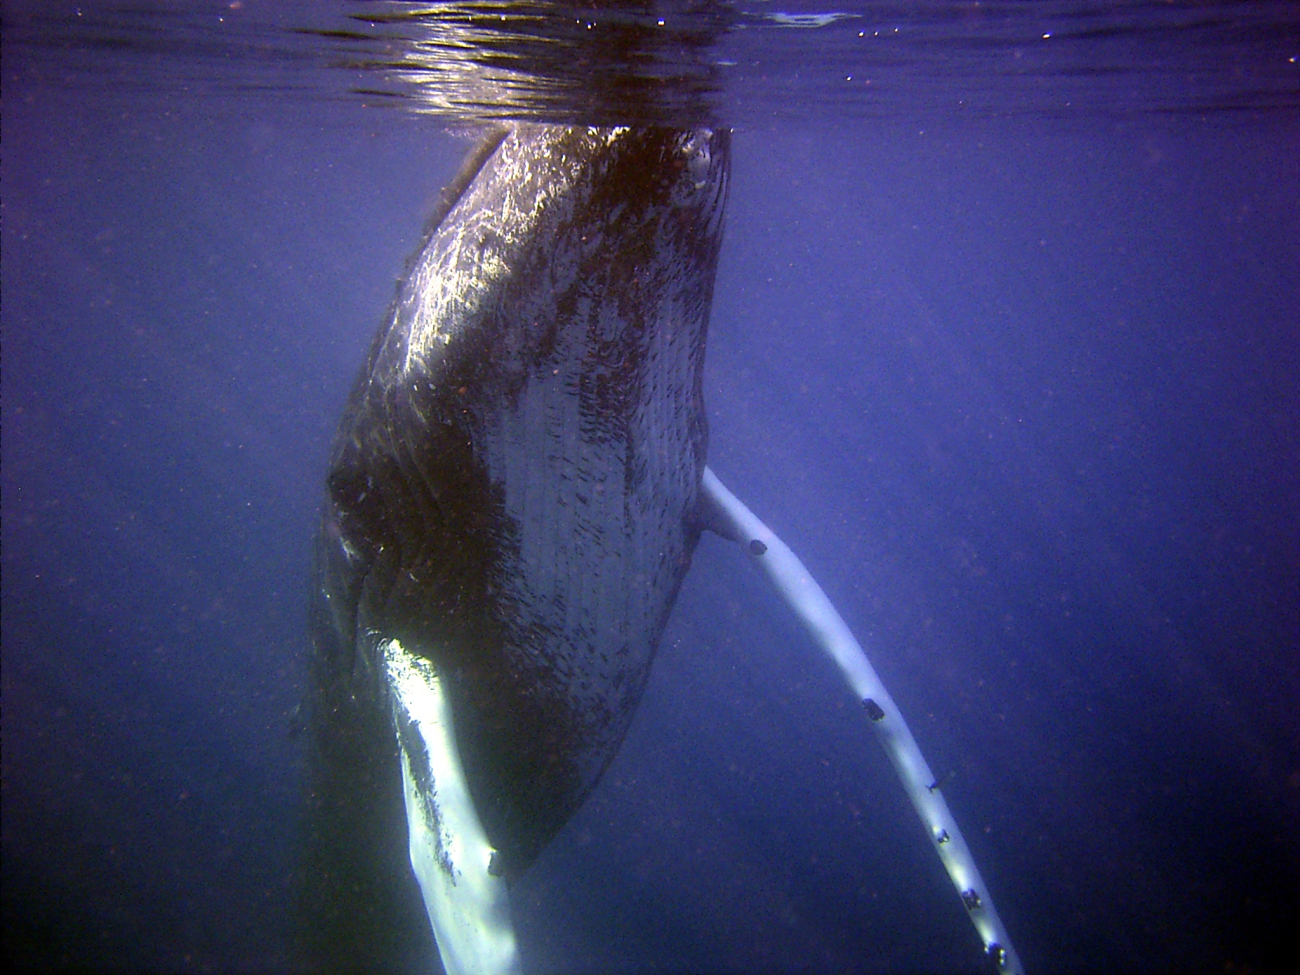 Curious humpback whale inspecting diver